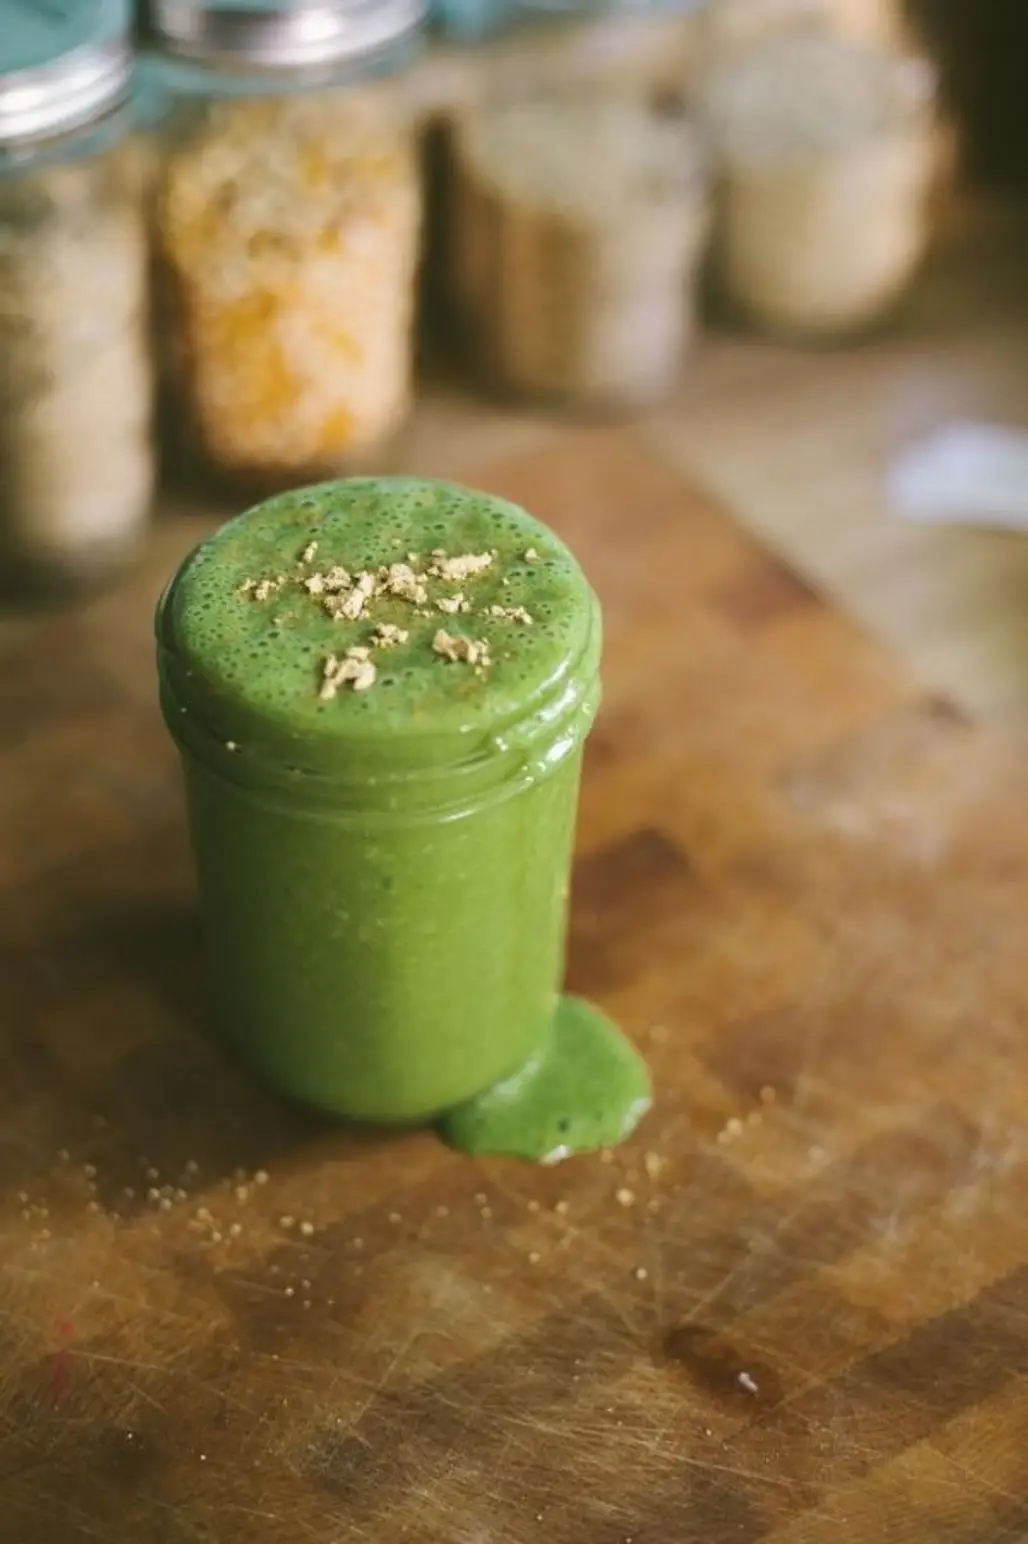 Kale, Banana, and Peanut Butter